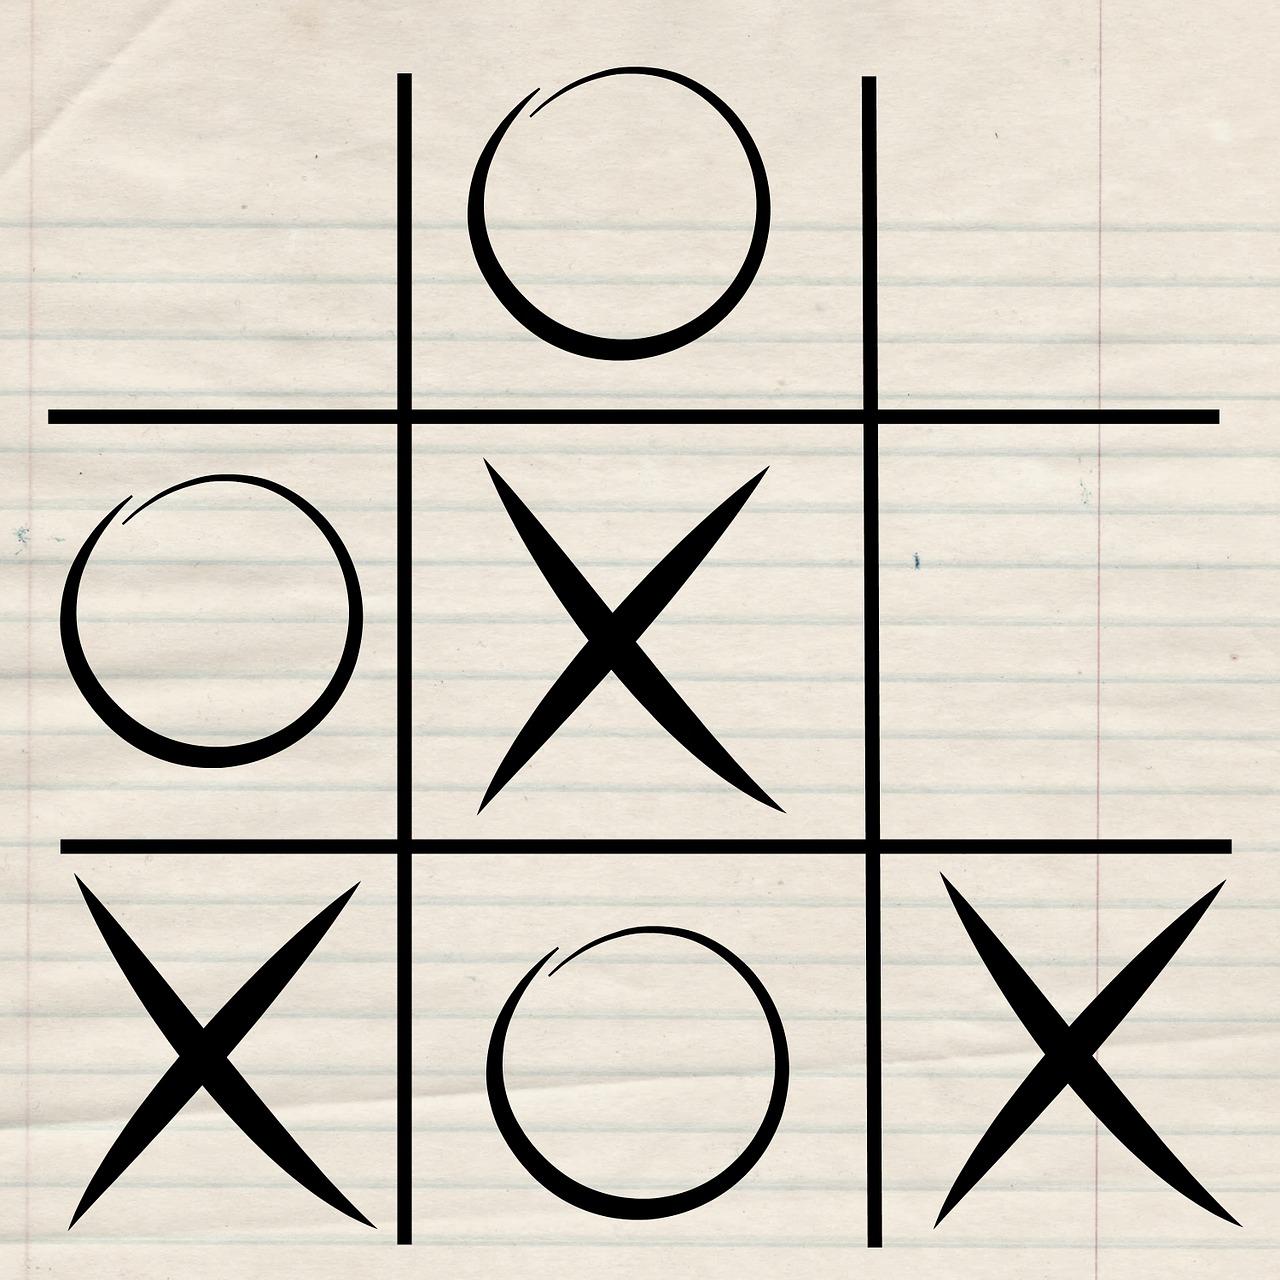 Is Google impossible tic-tac-toe possible?